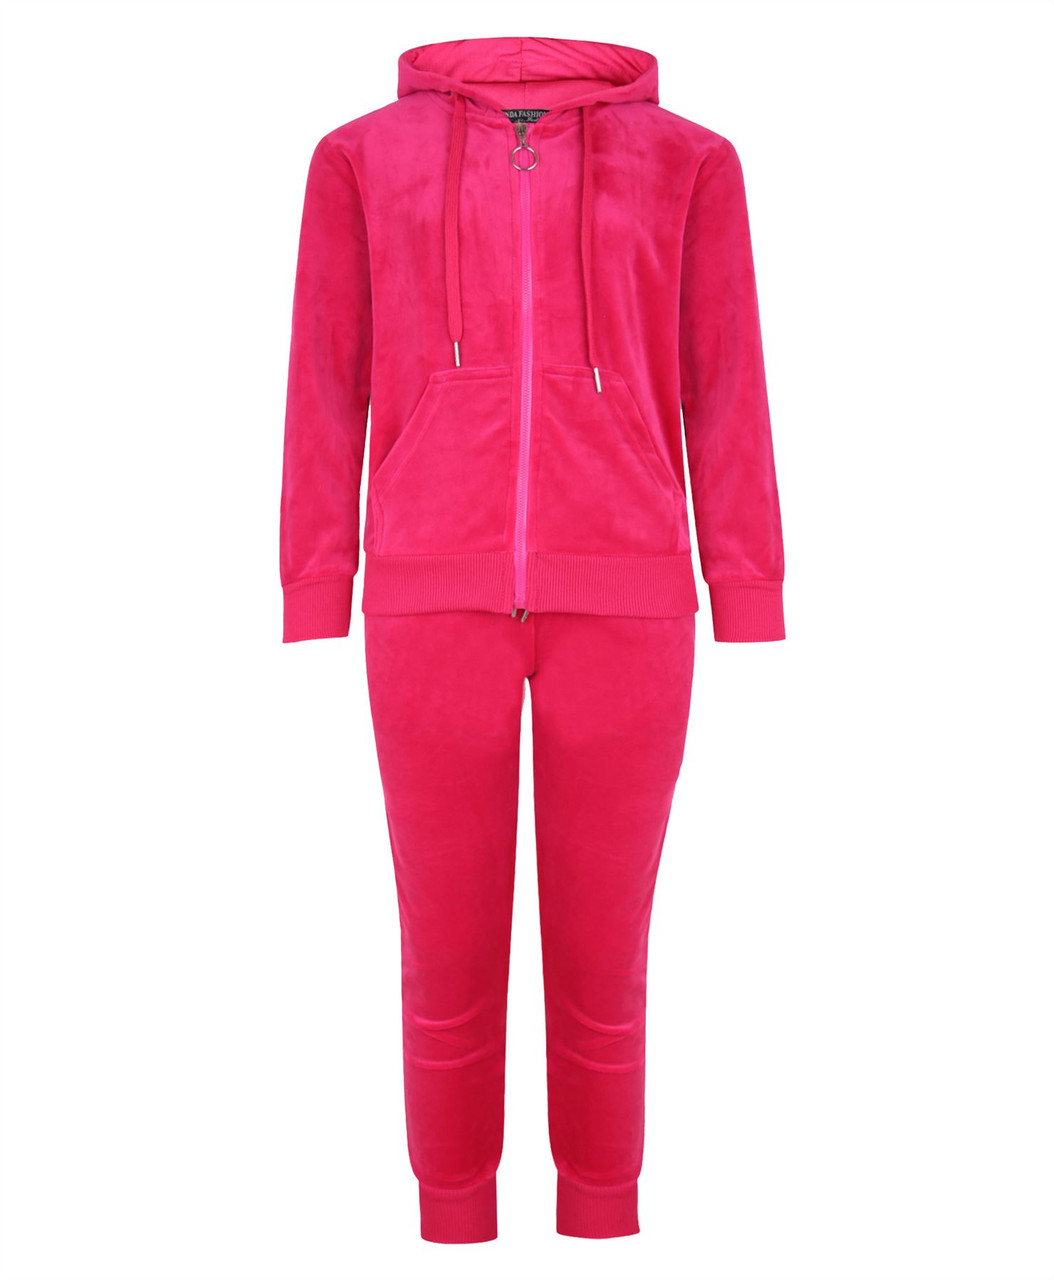 Kids Velour Tracksuit Top Bottoms in Various Colours